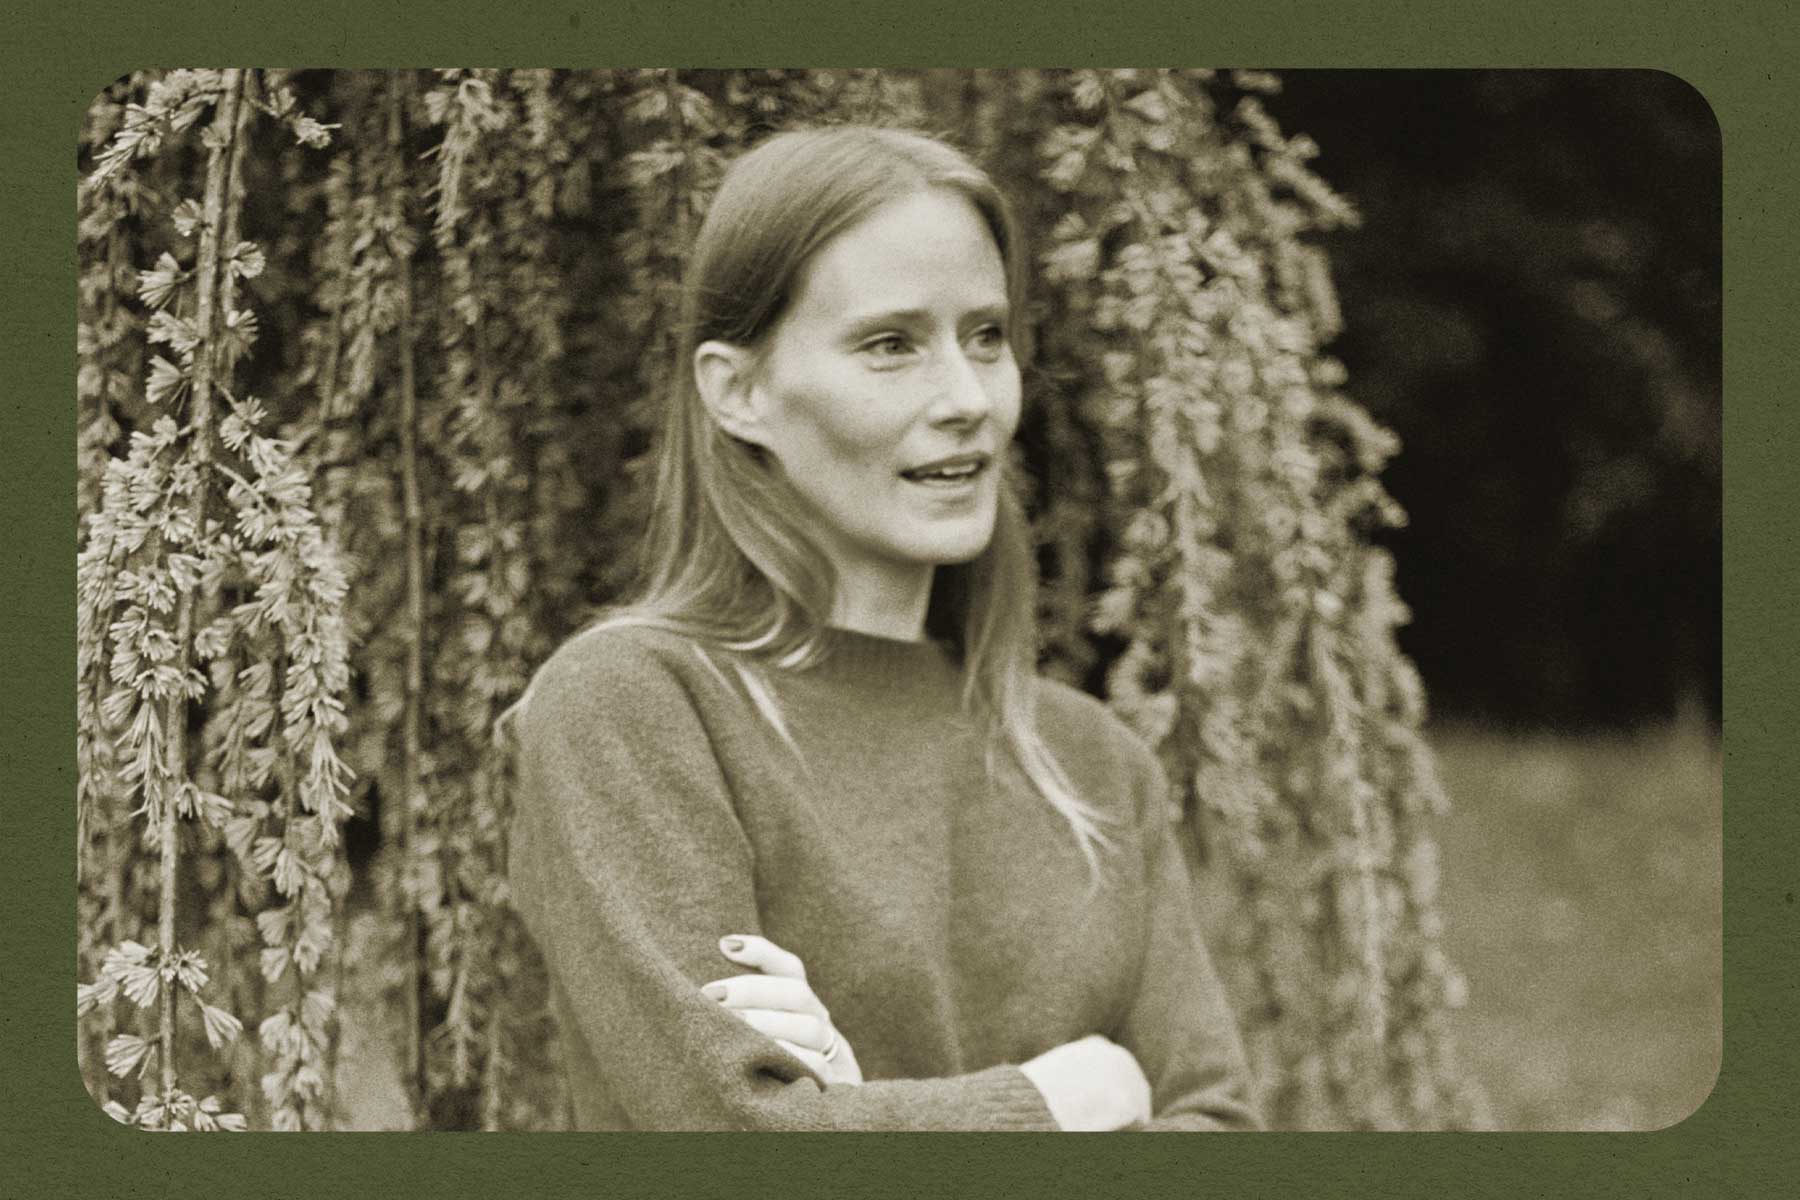 A black-and-white photo of author Sarah Bernstein standing in front of a tree with her arms crossed. There is a green border around the image.